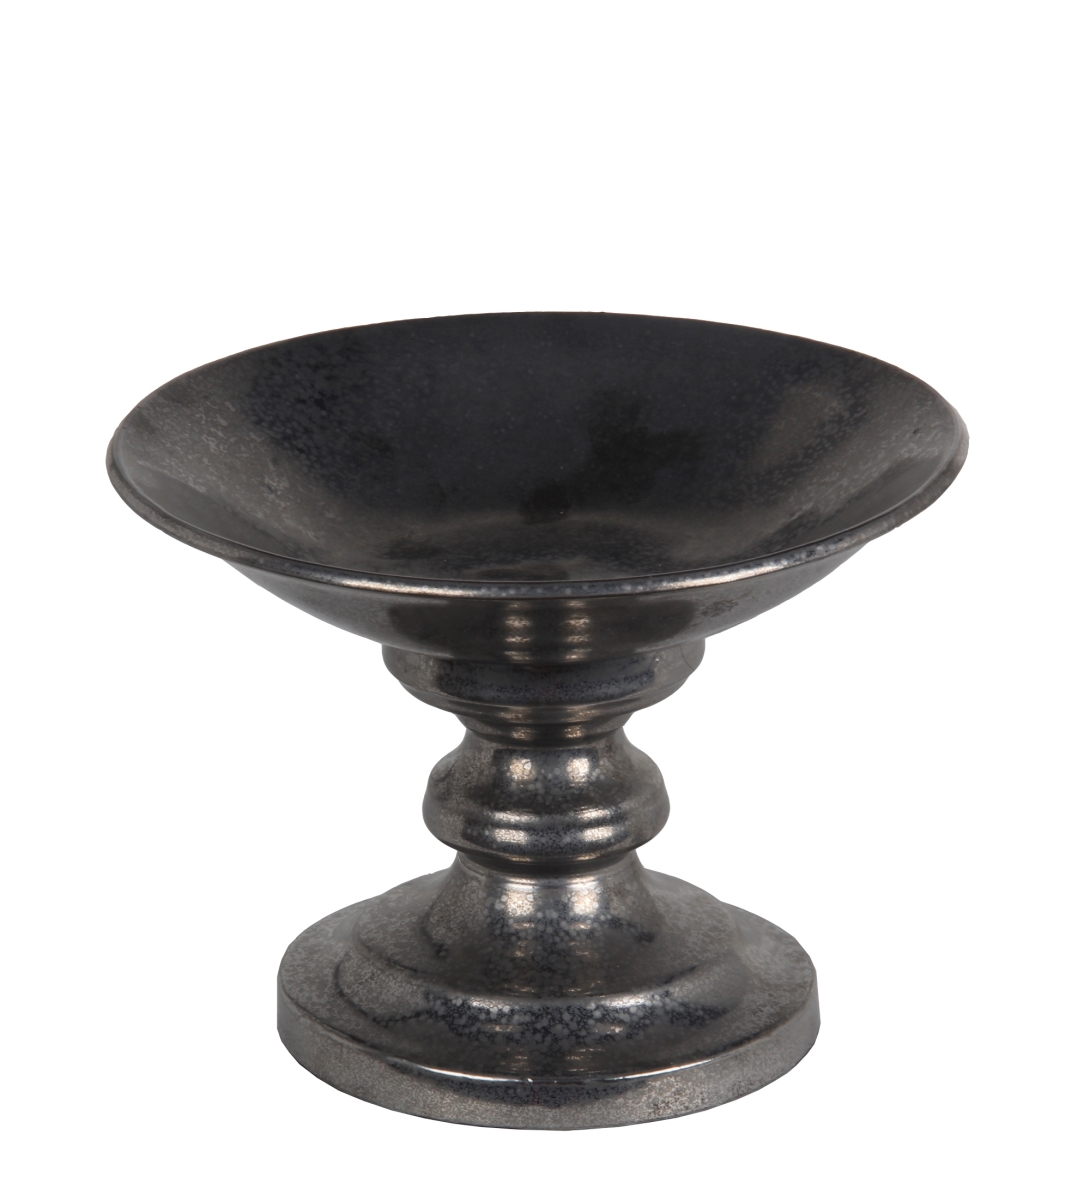 66950 10 X 10 X 7.5 In. Pewter Ceramic Bowl, Small